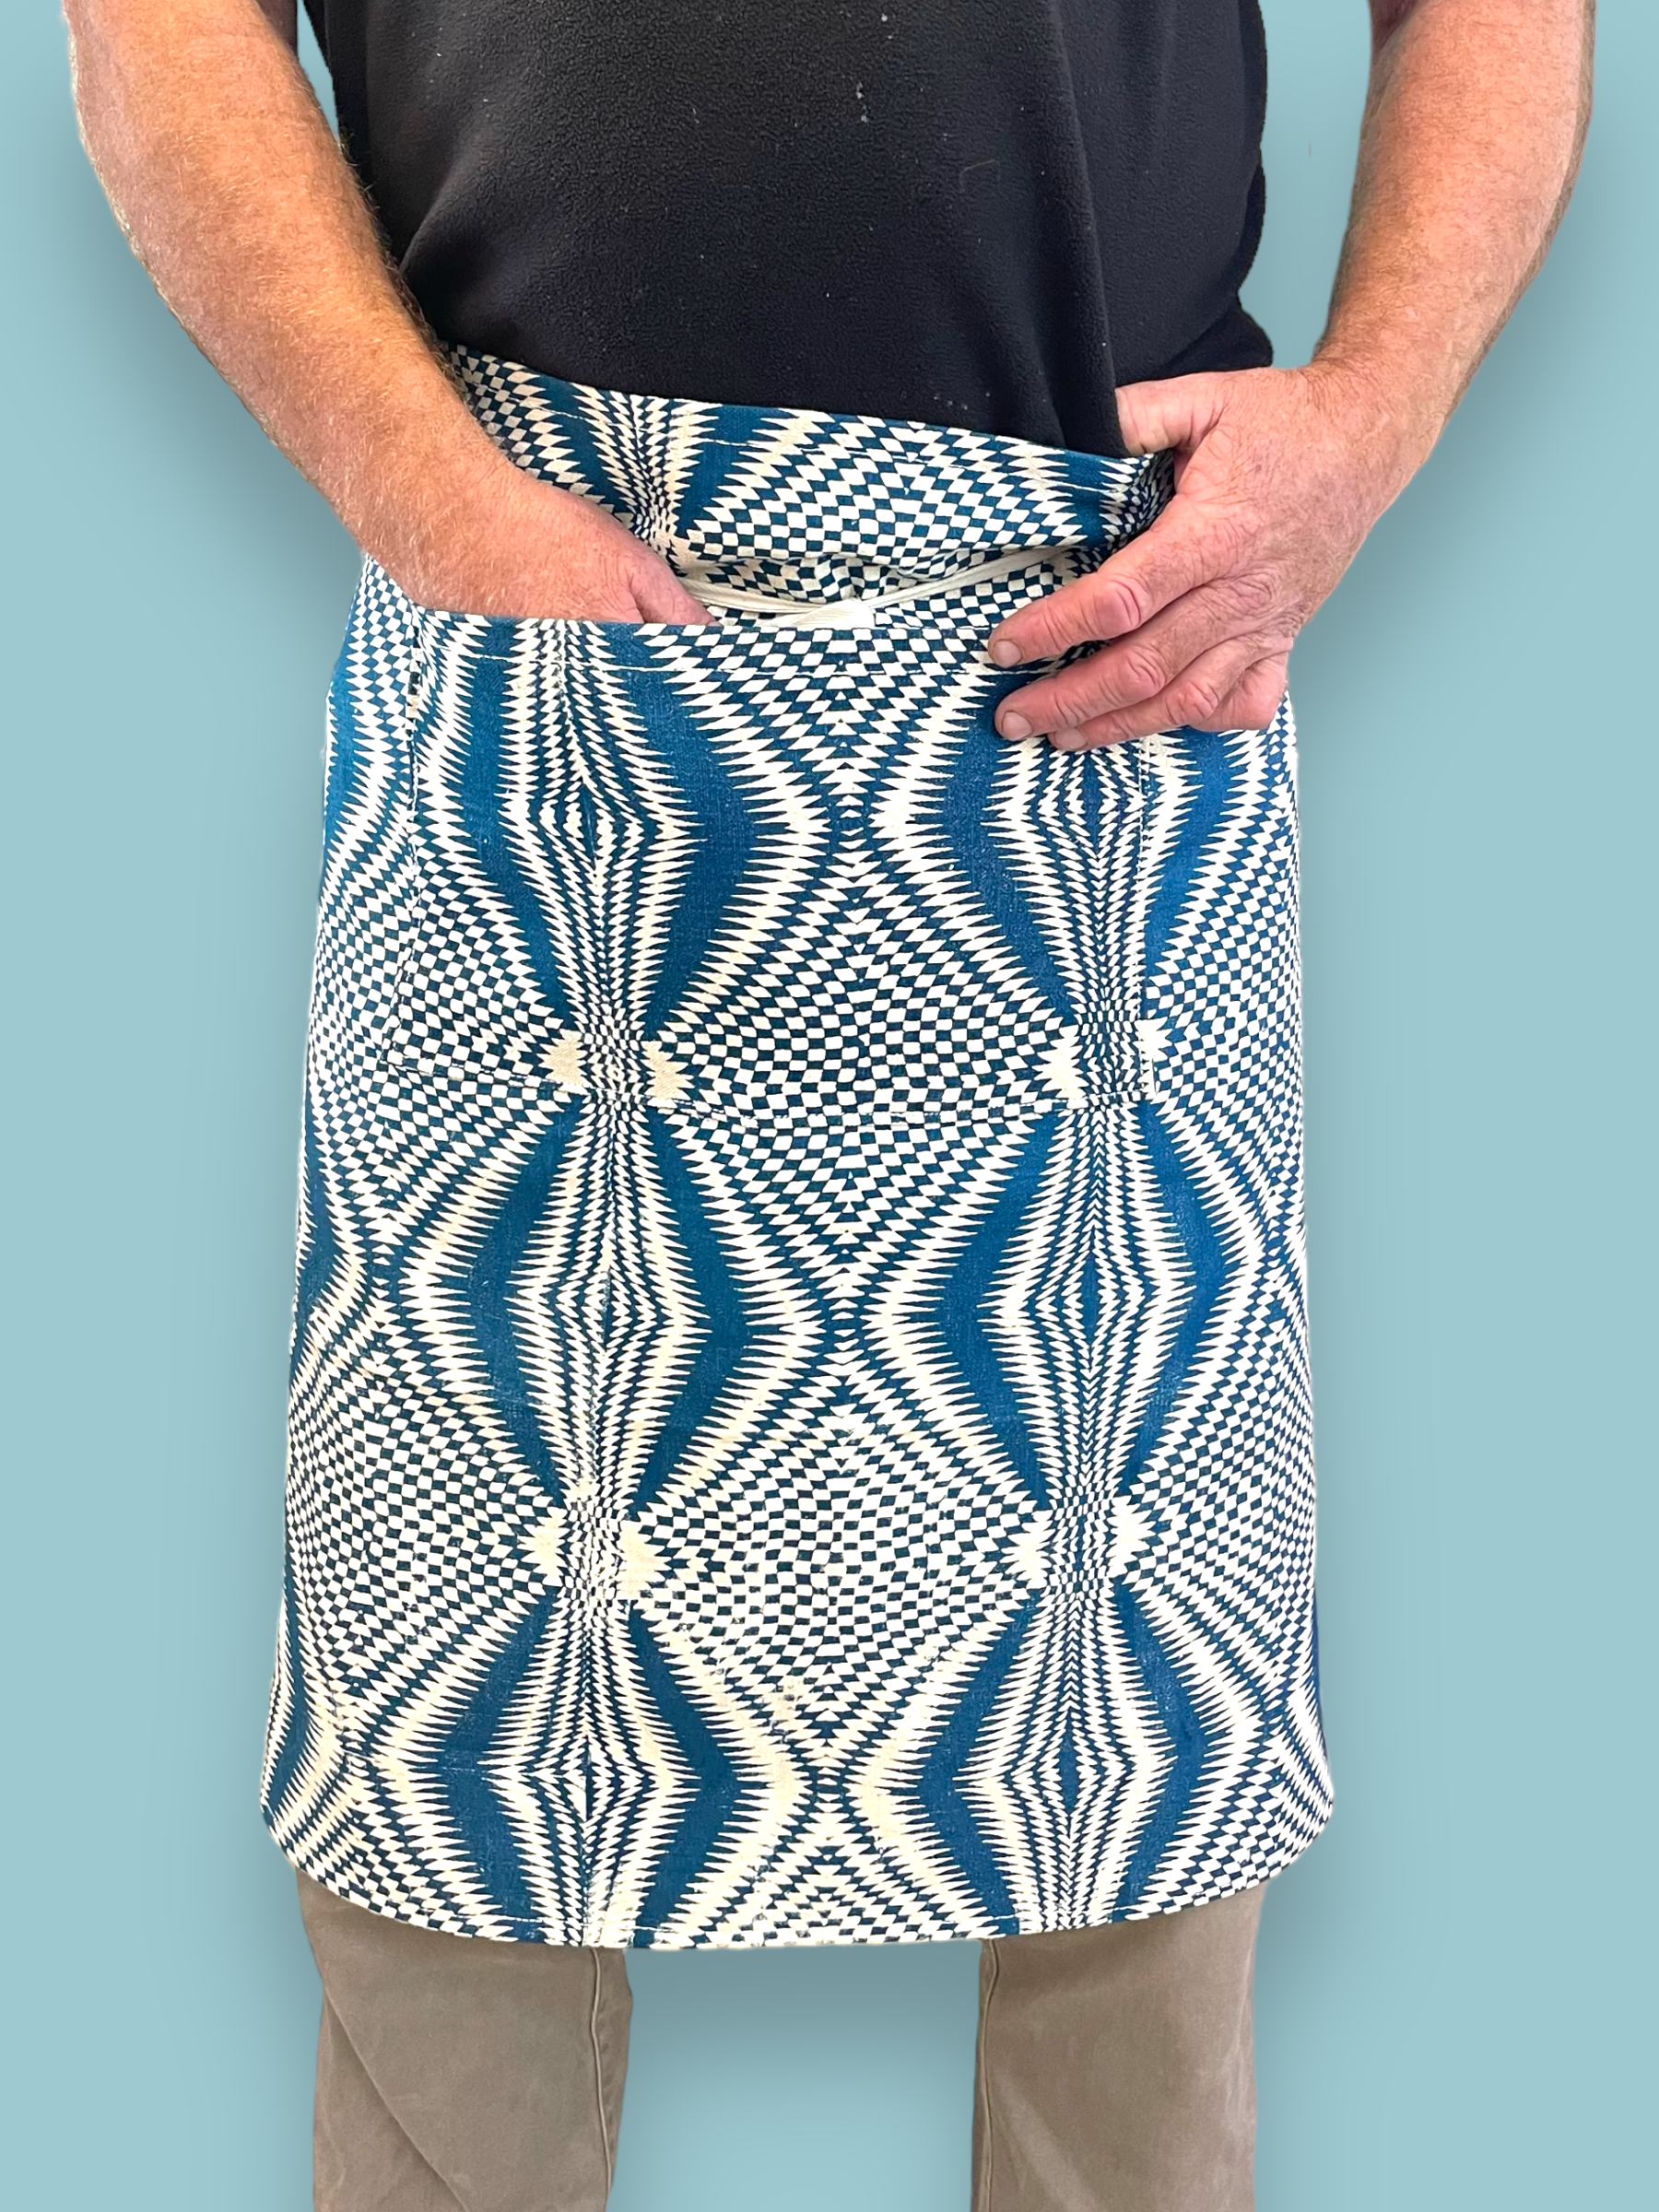 Picture of a person wearing handprinted apron